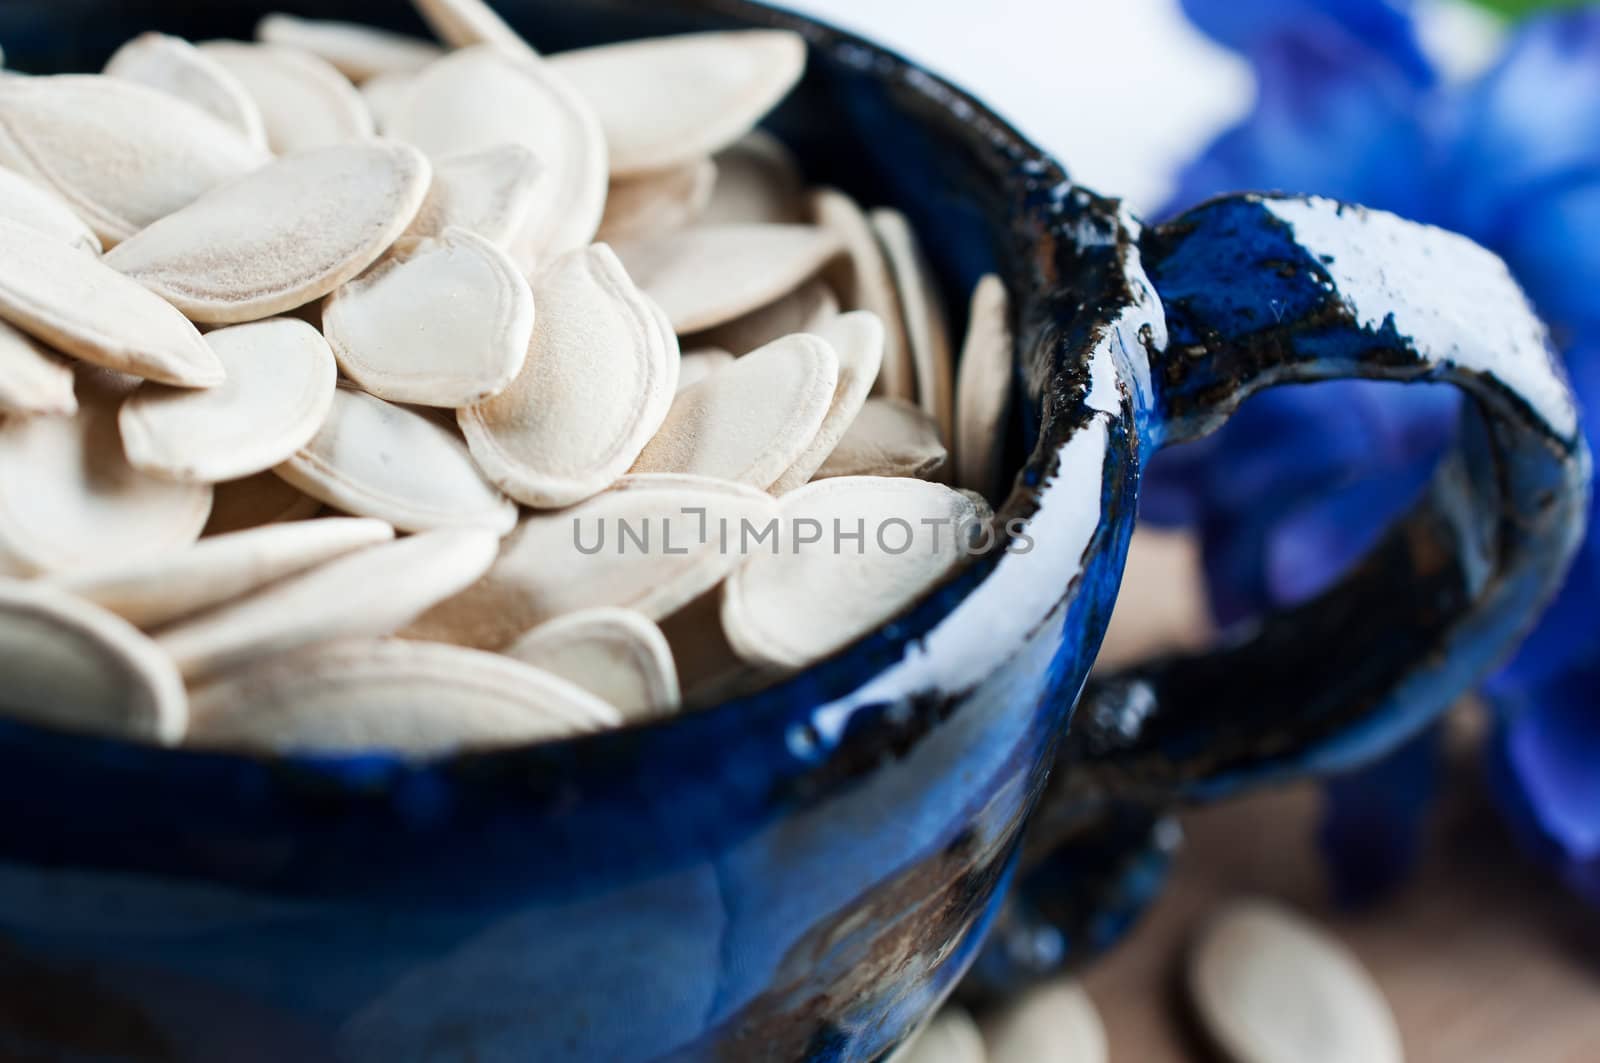 Pumpkin seeds in the blue bowl by Nanisimova